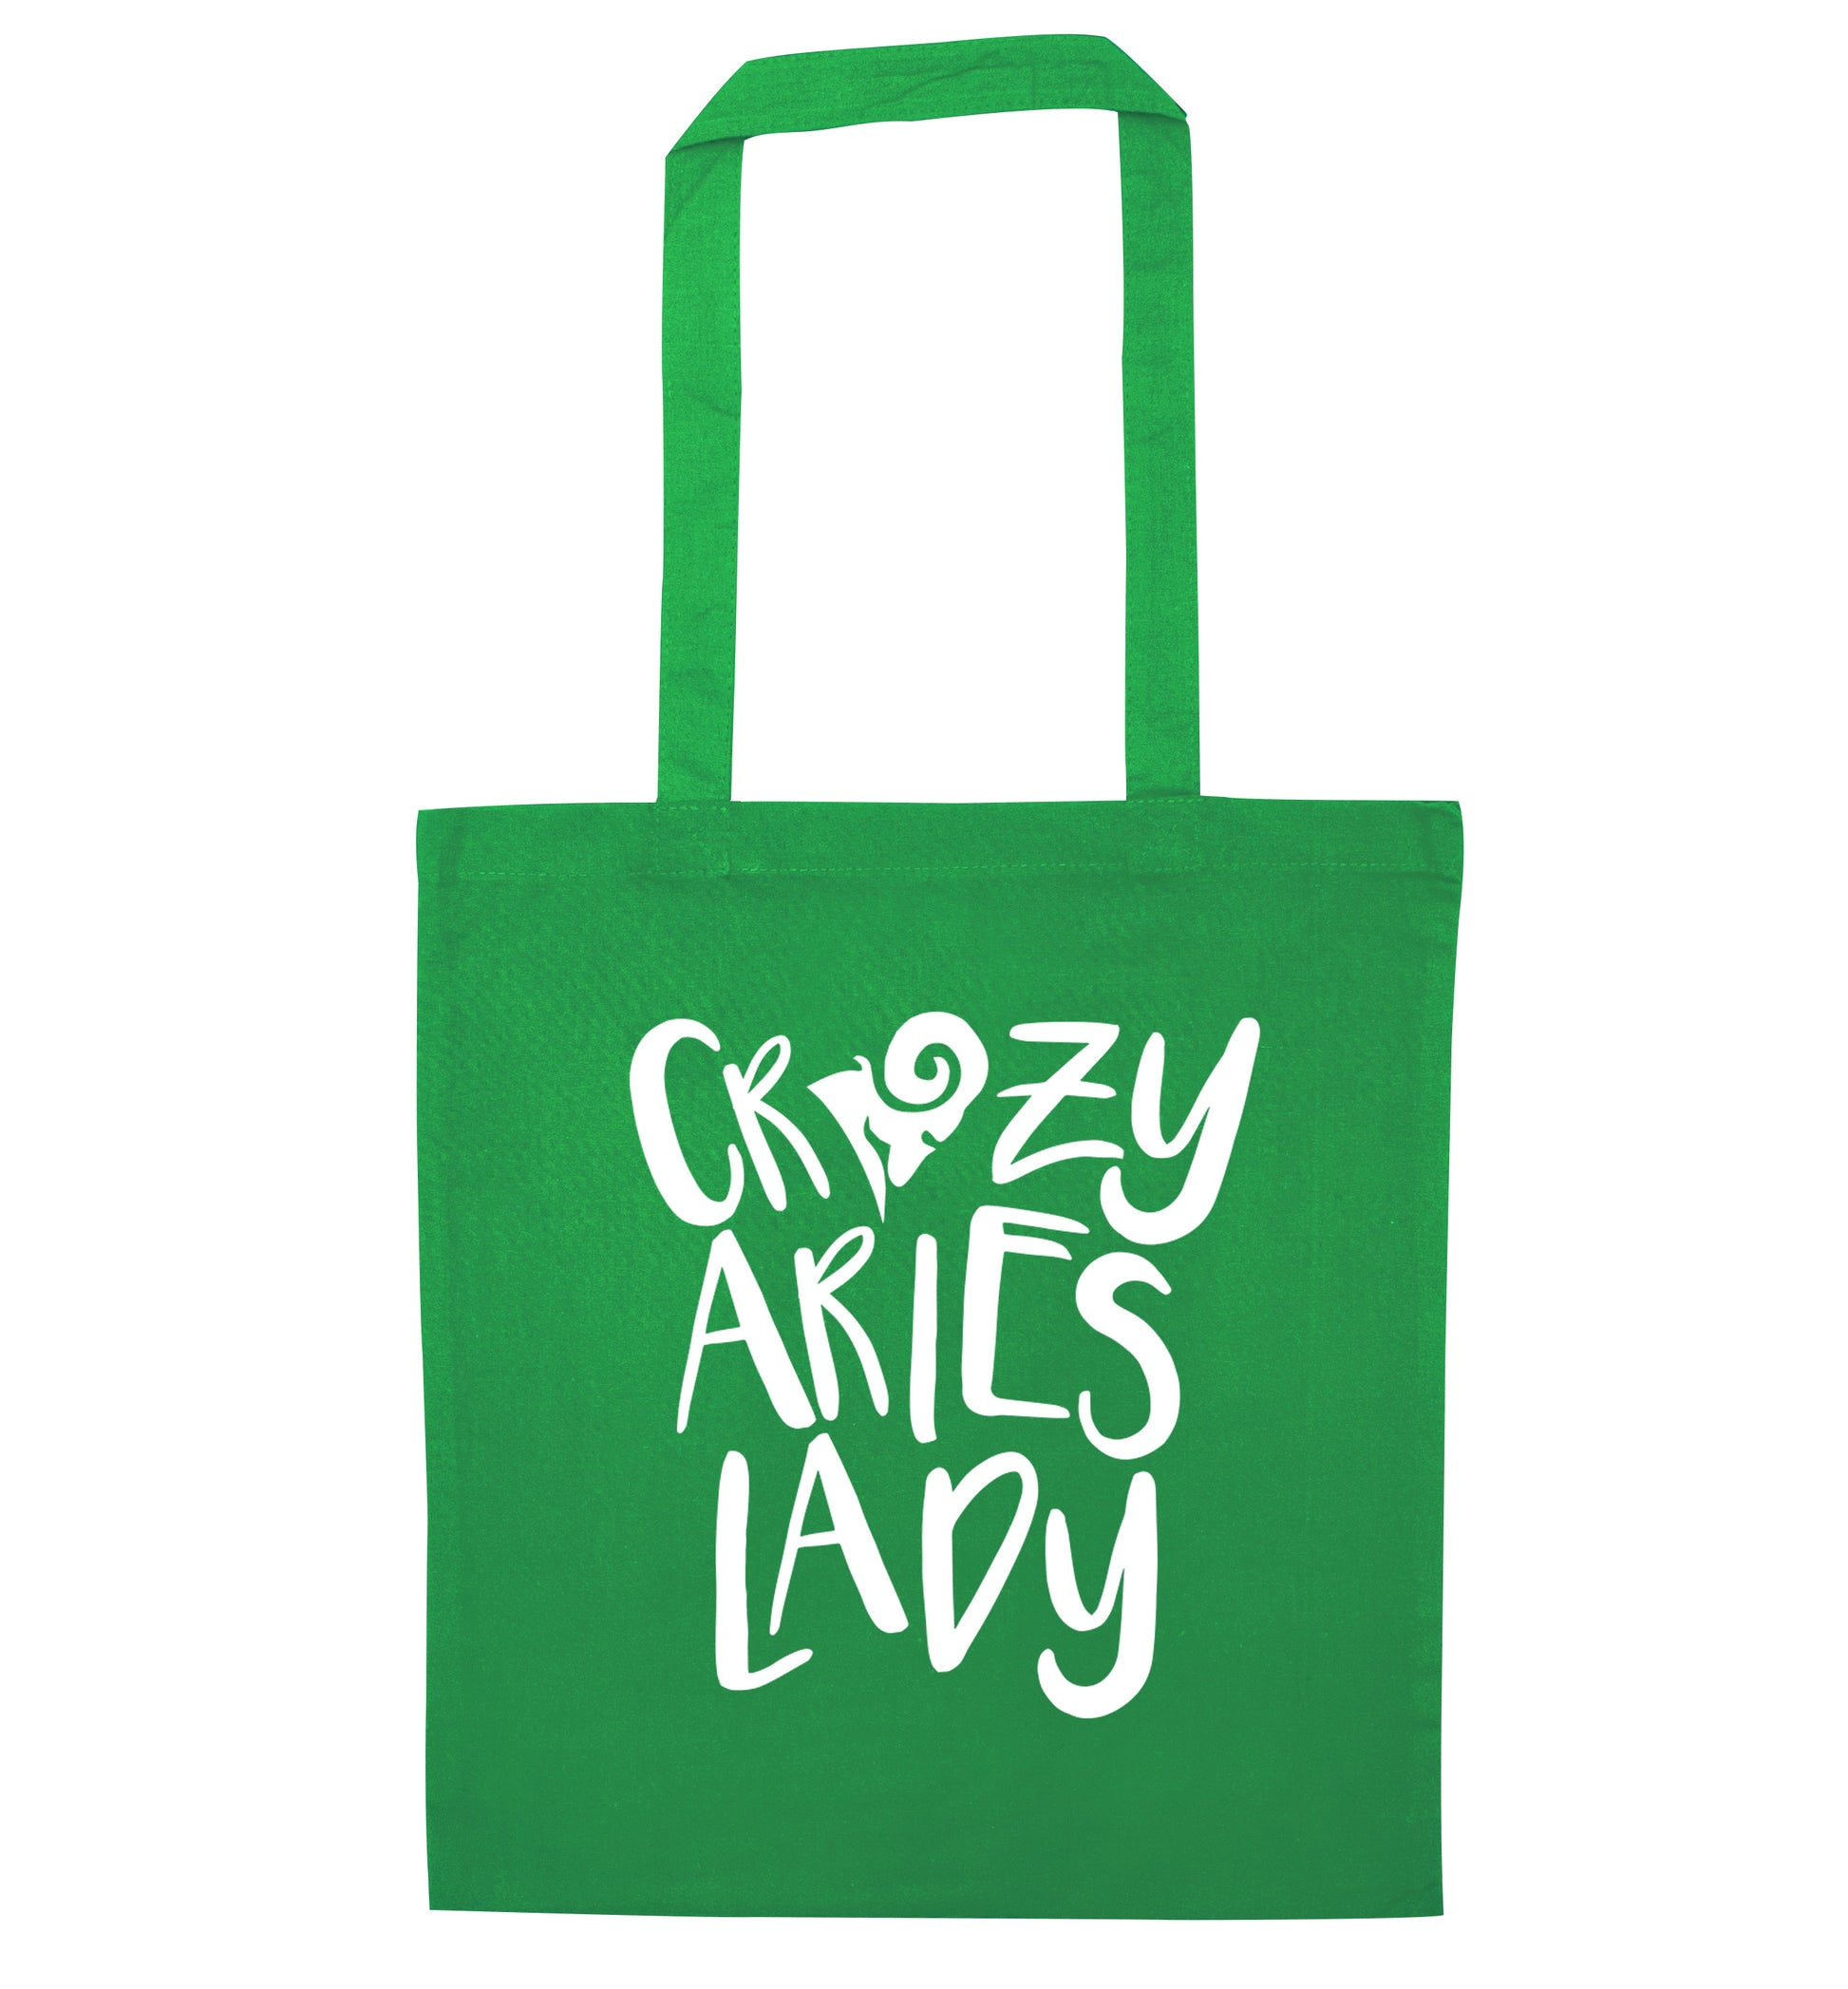 Crazy aries lady green tote bag